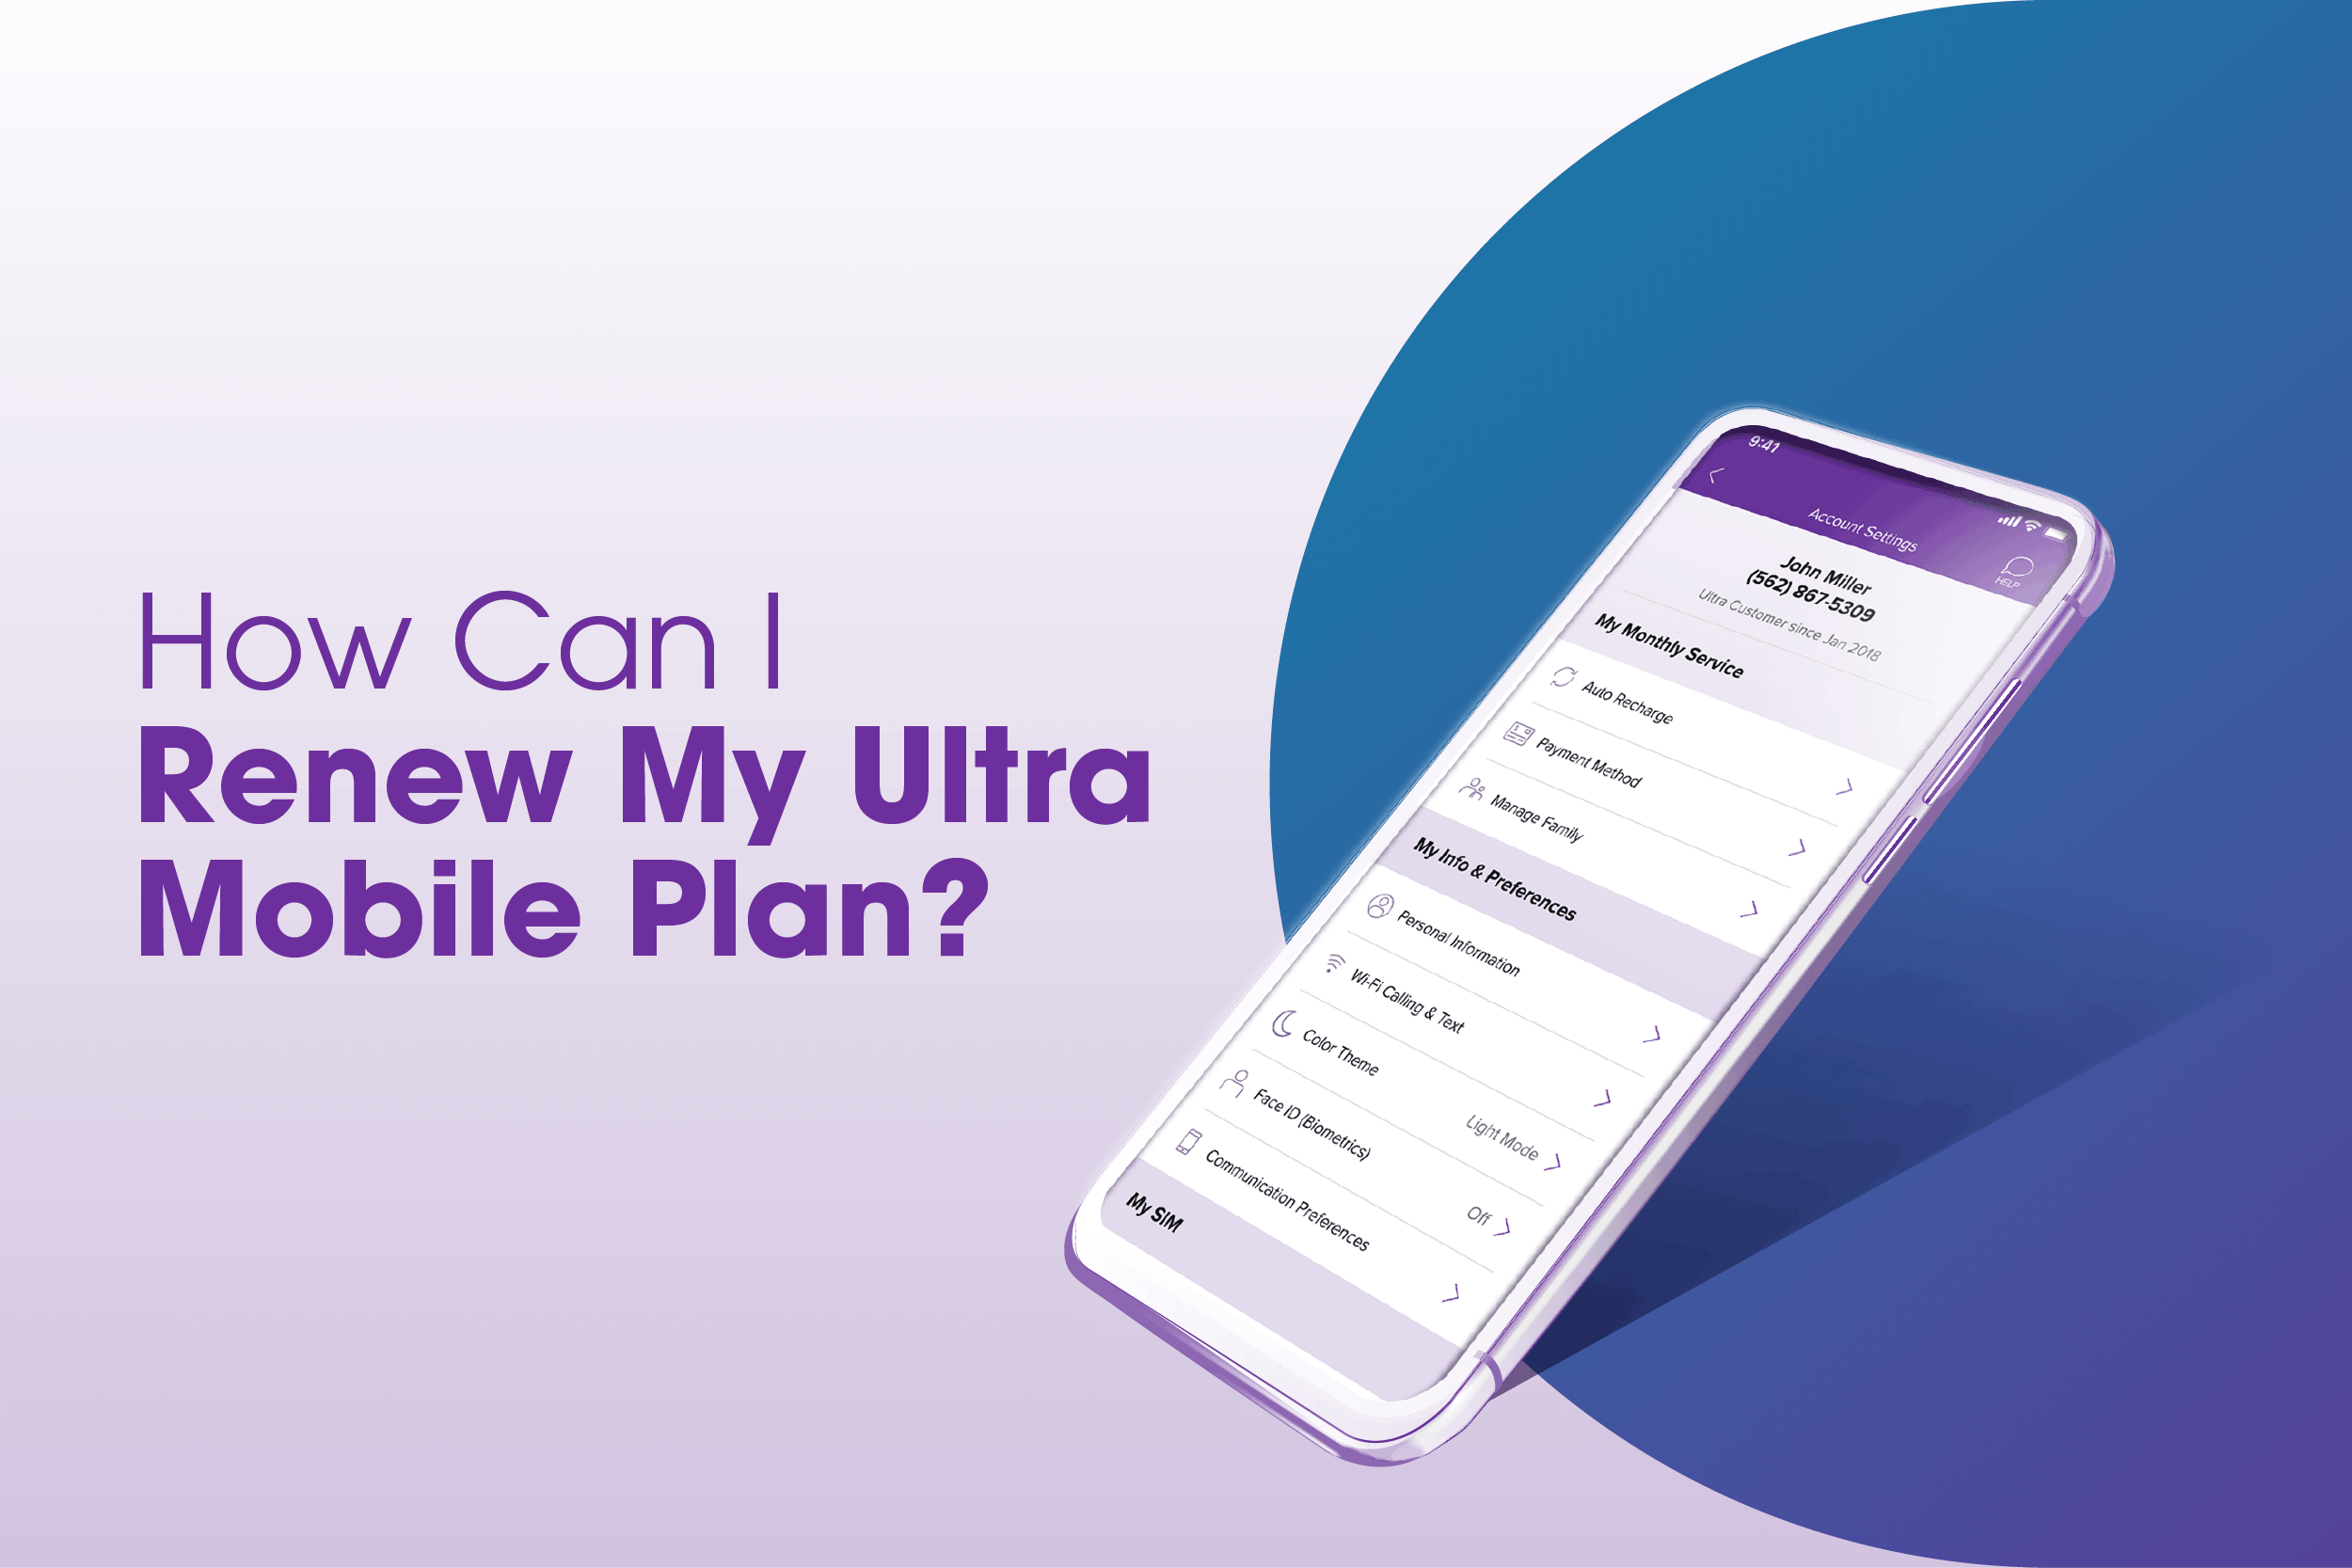 How to Renew Your Ultra Mobile Plan